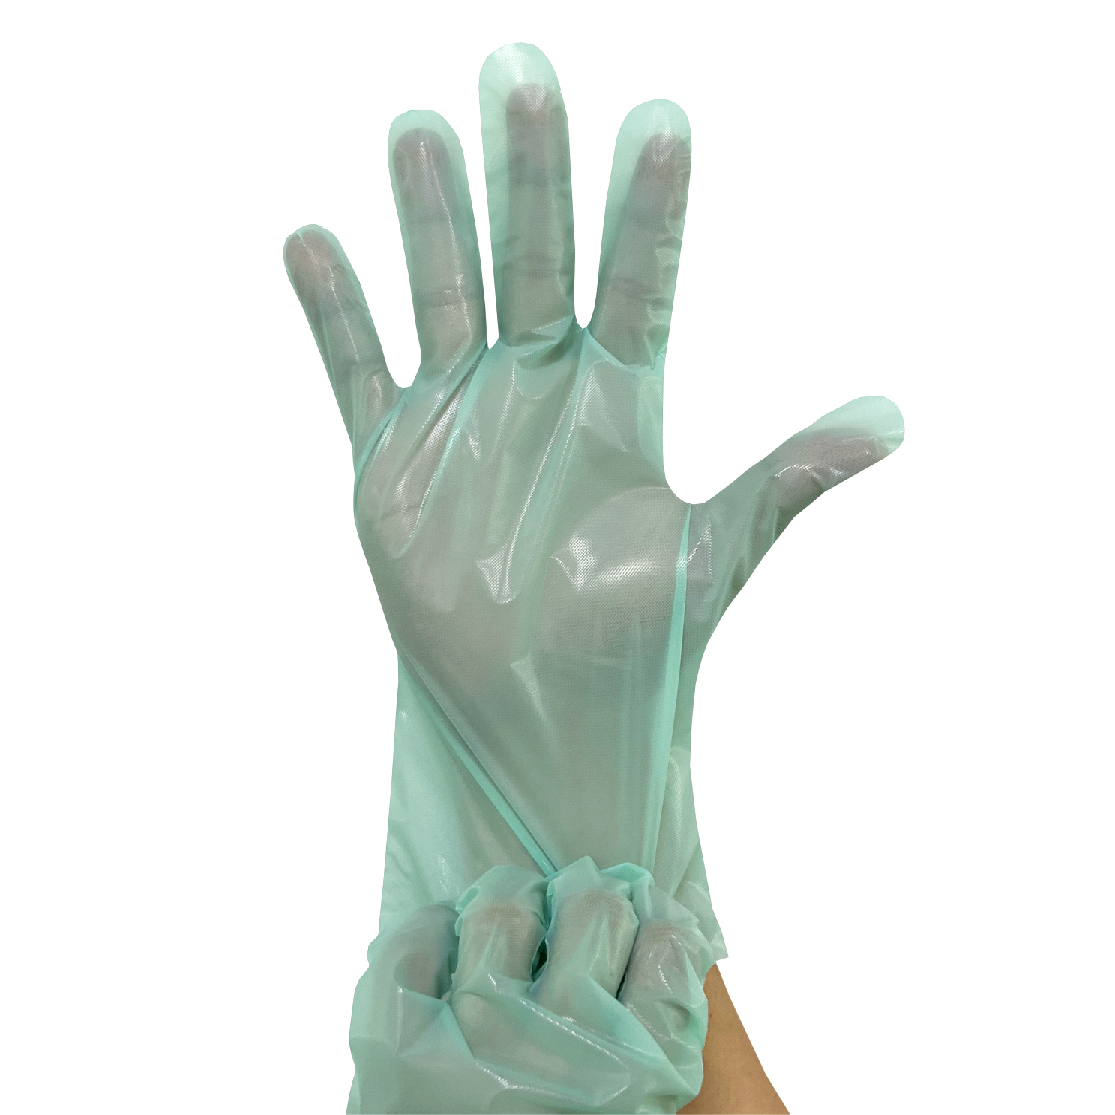 Products - The World's Largest Manufacturer of Glove